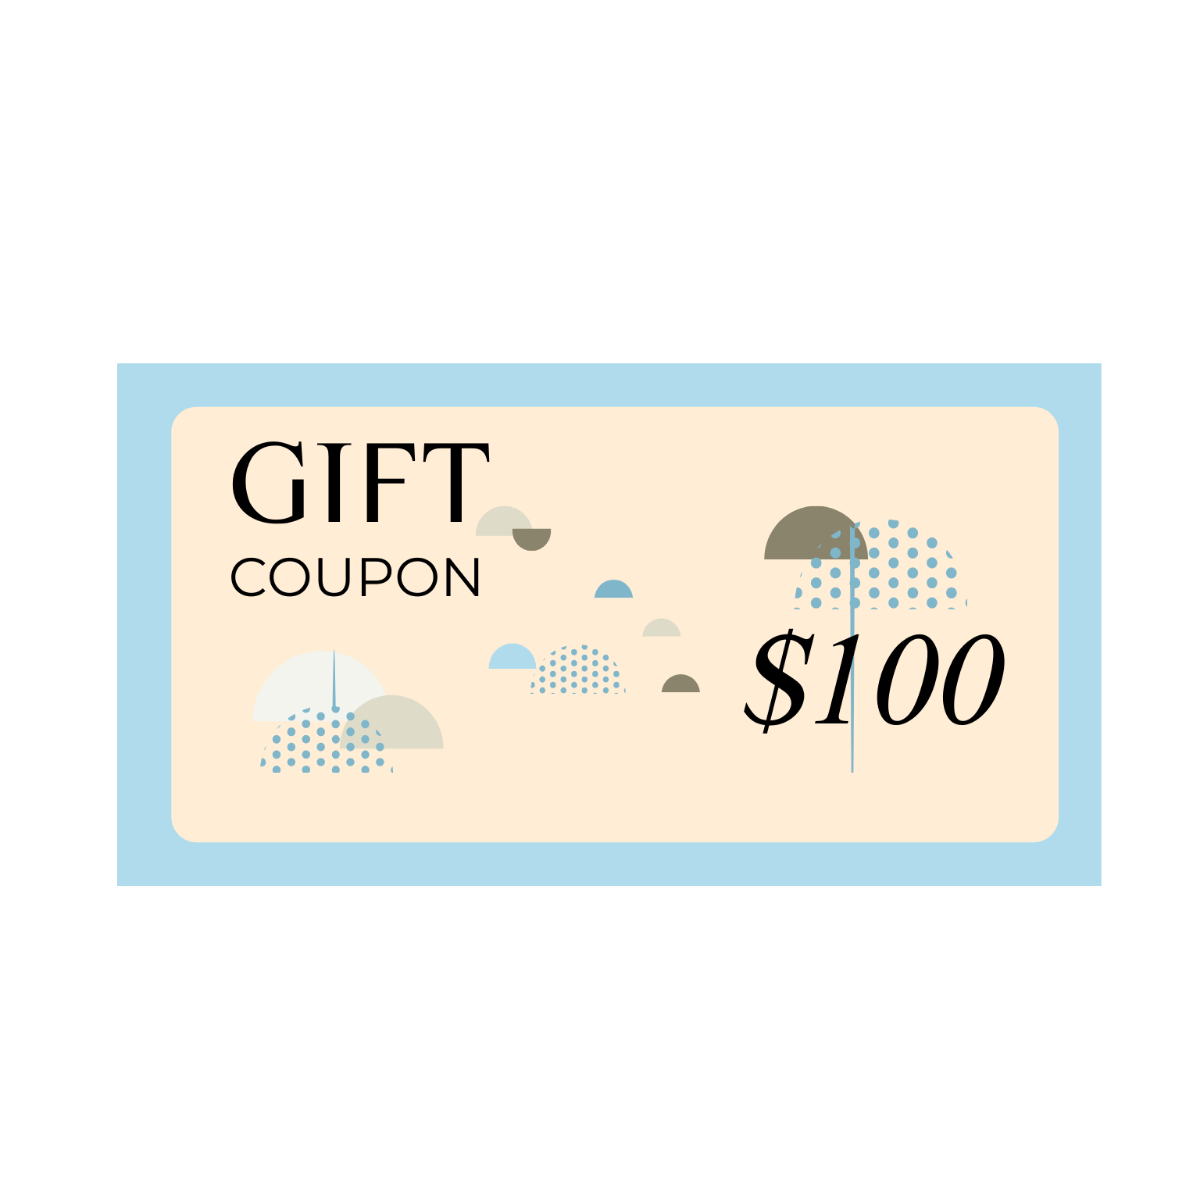 Gift Coupon Vector Template